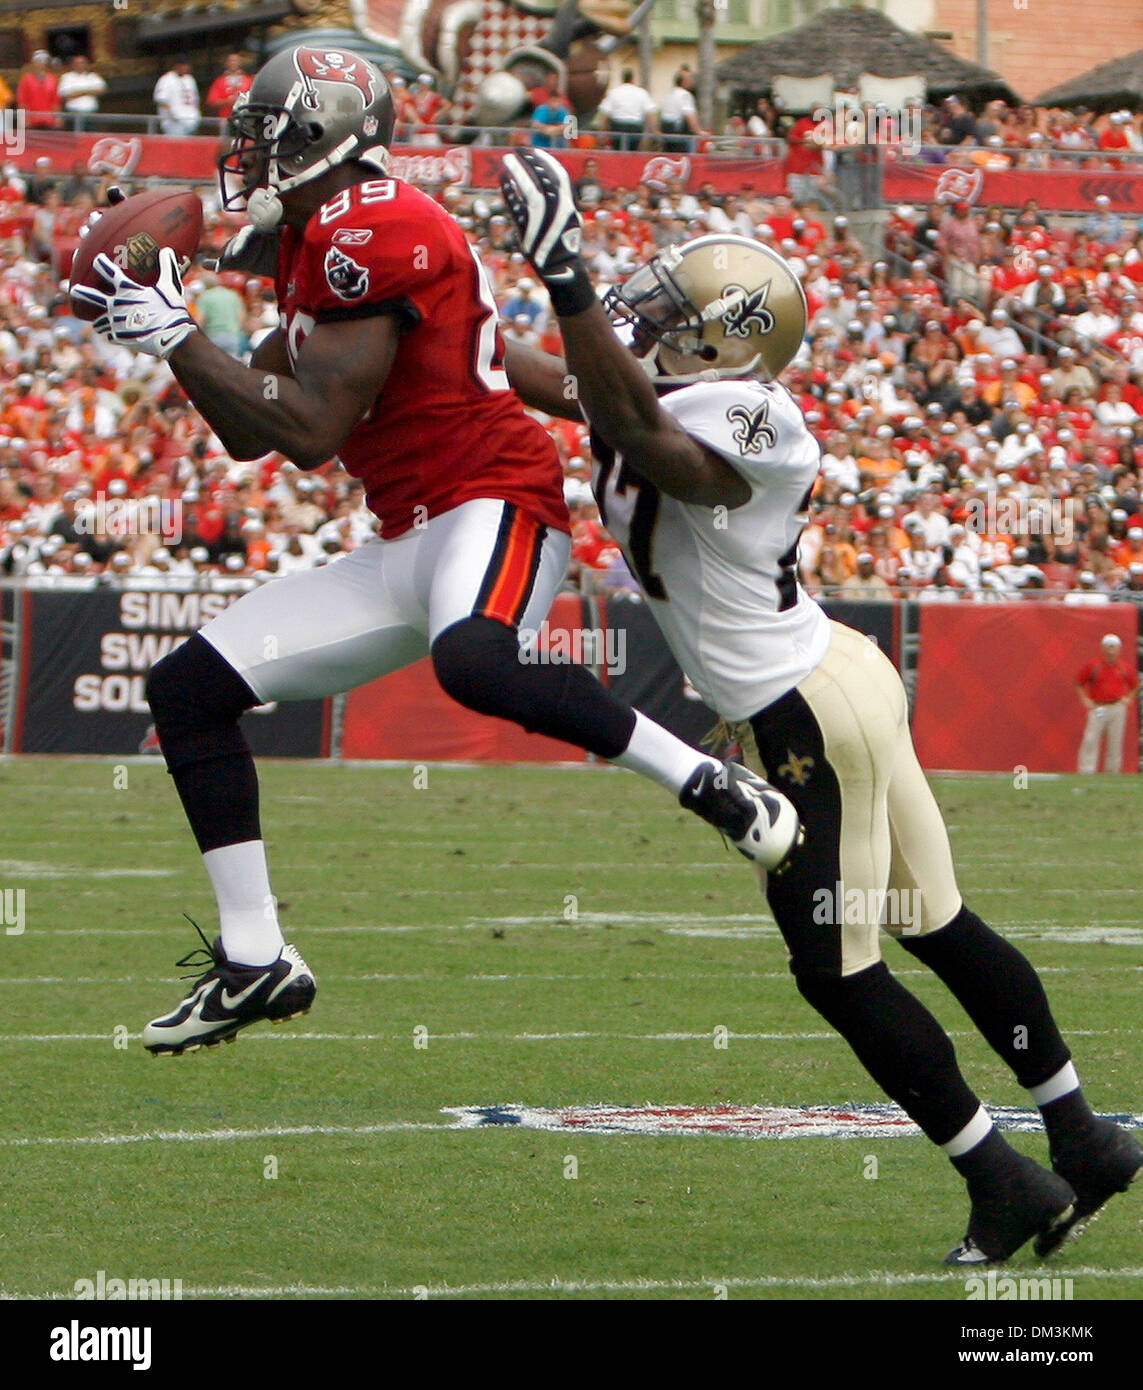 Tampa Bay Buccaneers wide receiver Antonio Bryant (89) makes a sideline  catch during the NFL football game between the New Orleans Saints and Tampa  Bay Buccaneers at Raymond James Stadium in Tampa